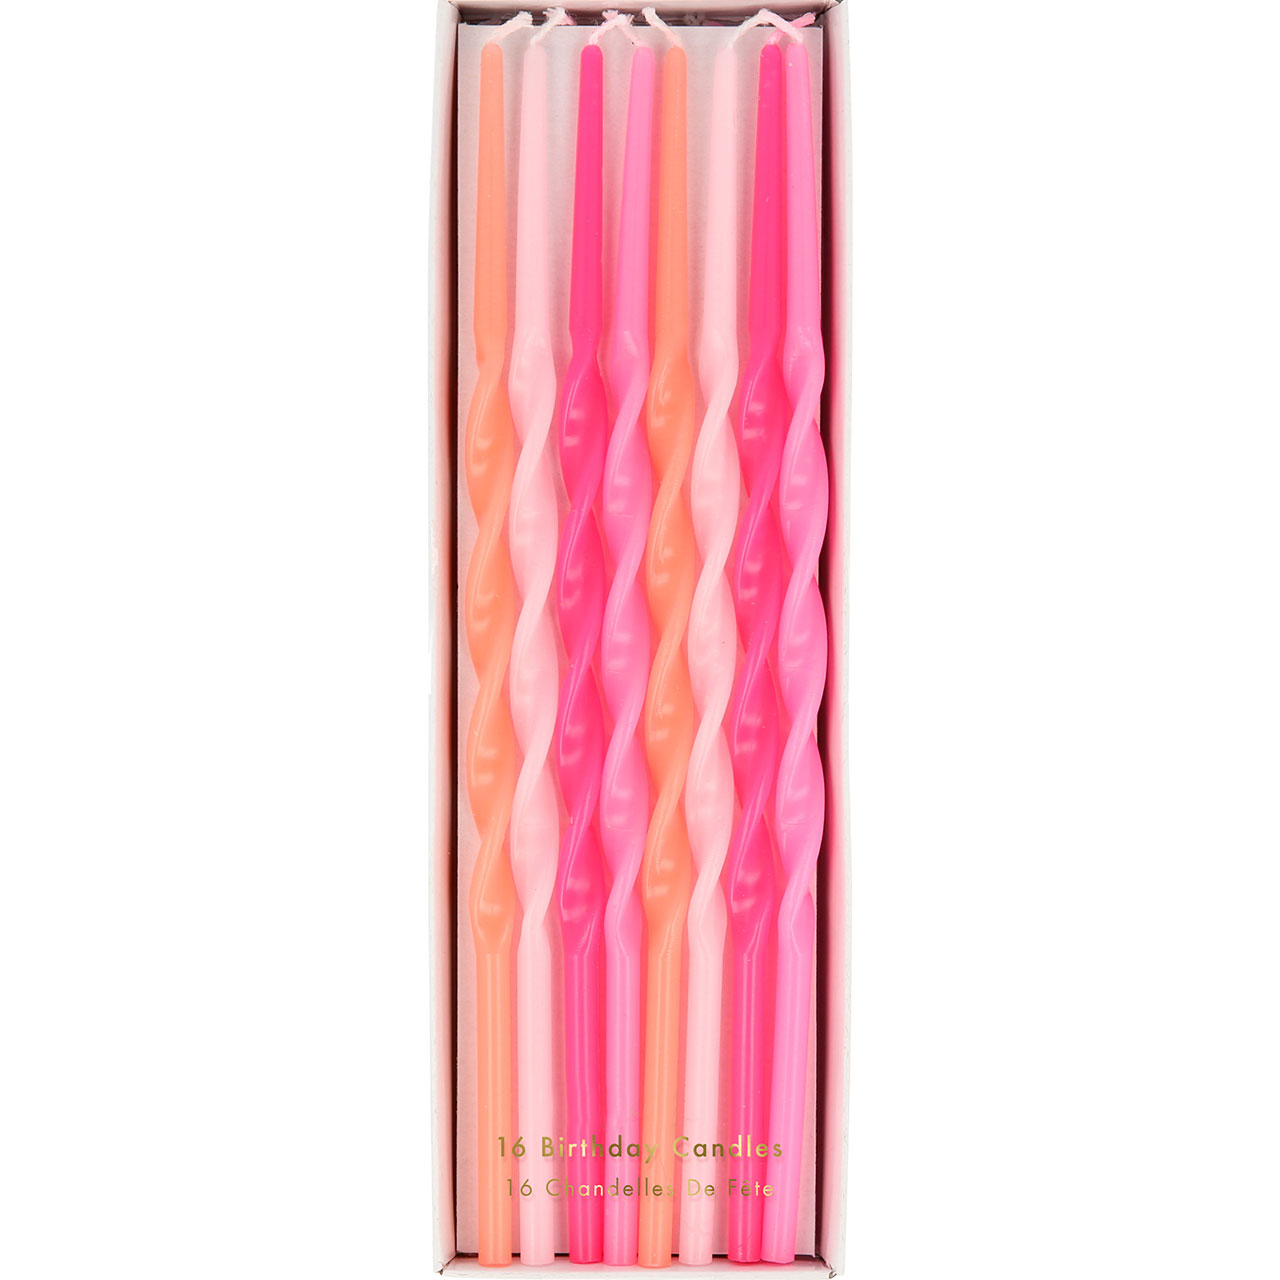 Cake Candles - Twisted Pink Mix